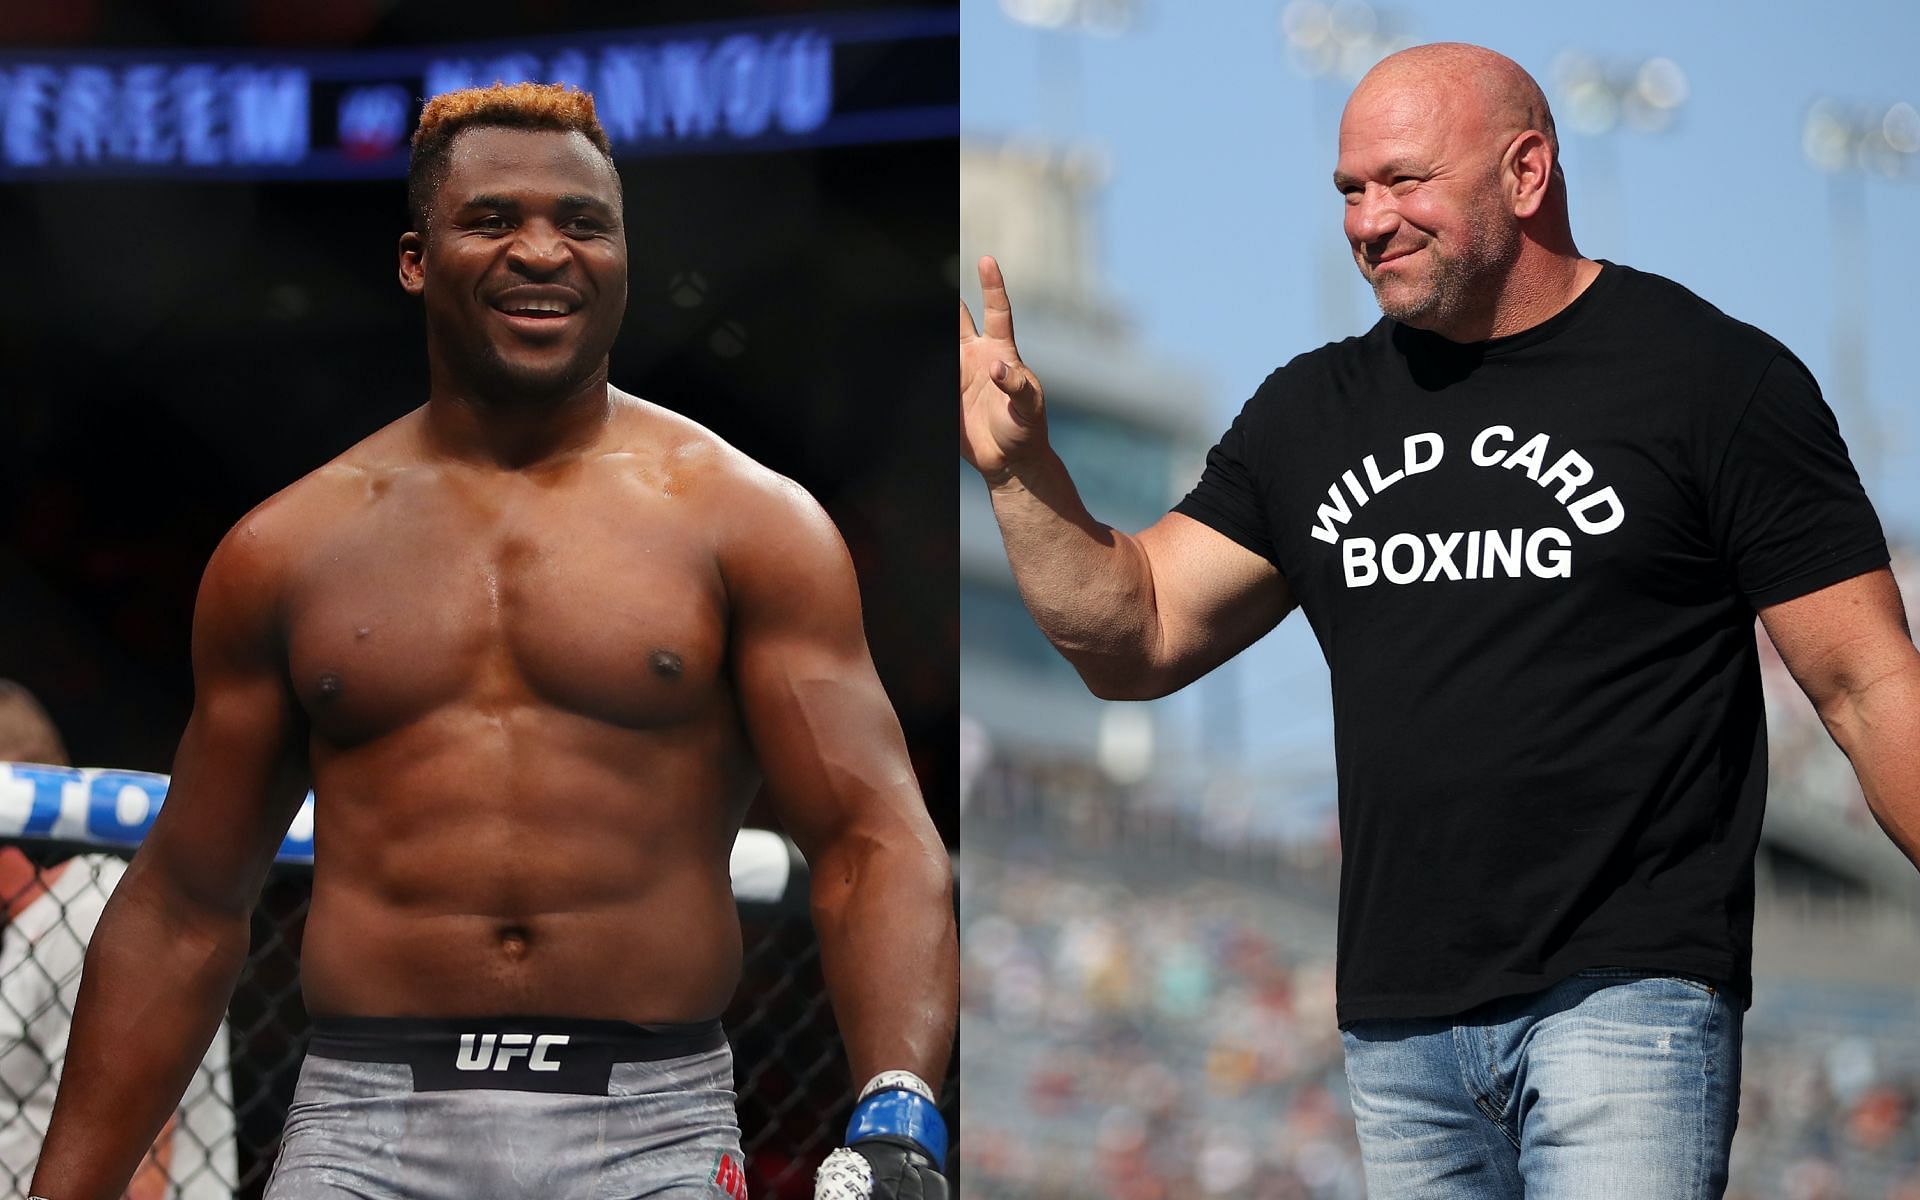 Francis Ngannou and Dana White [Image credits: Getty Images ]